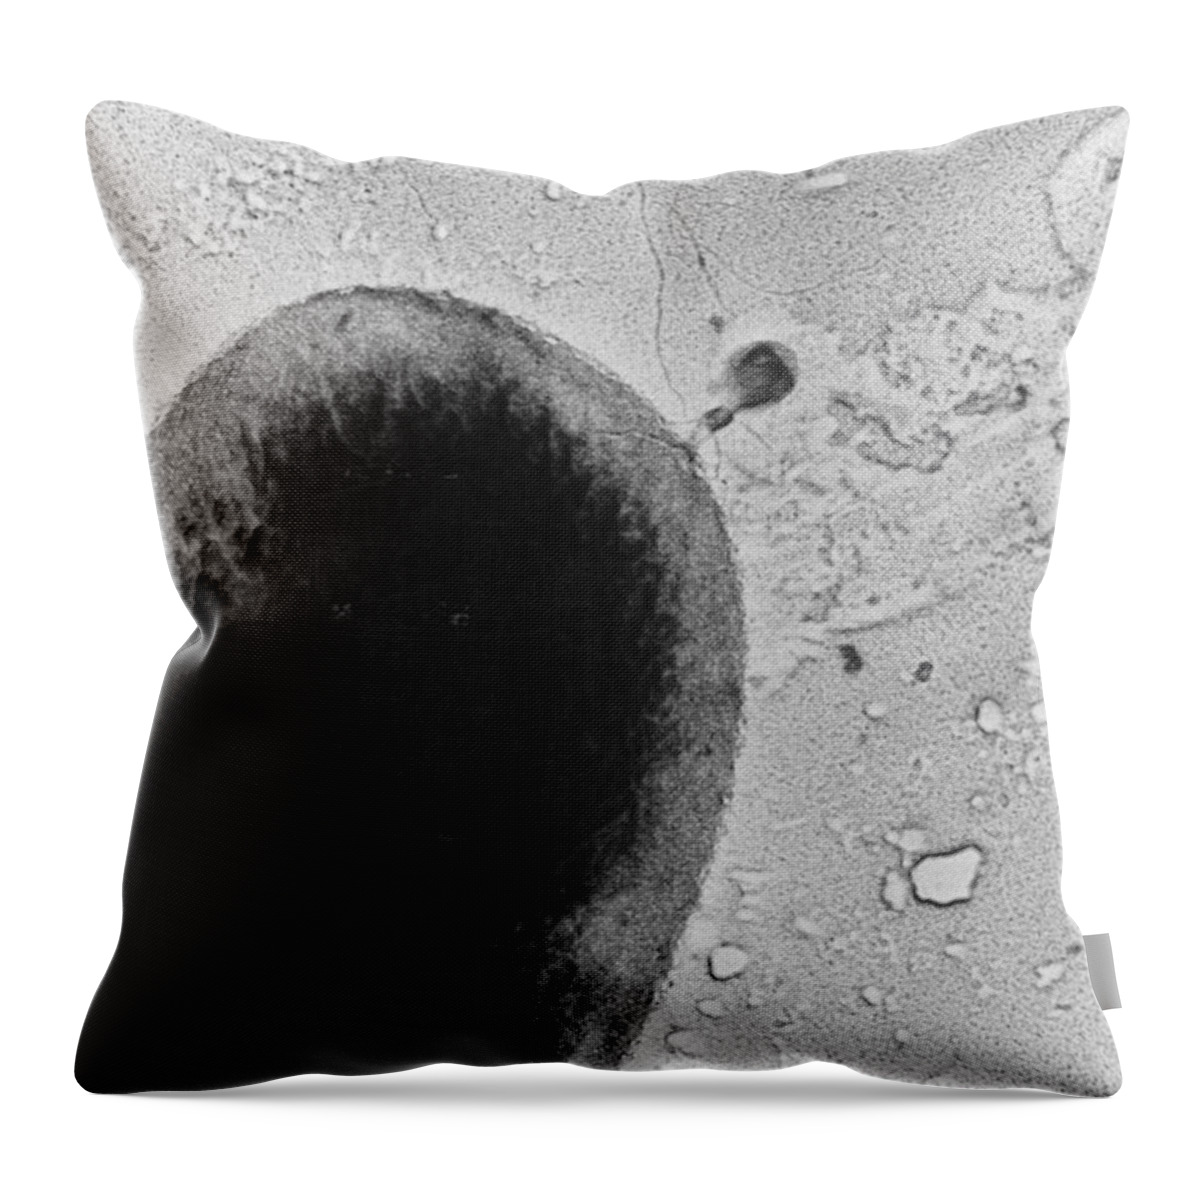 Science Throw Pillow featuring the photograph T4 Bacteriophage by Science Source